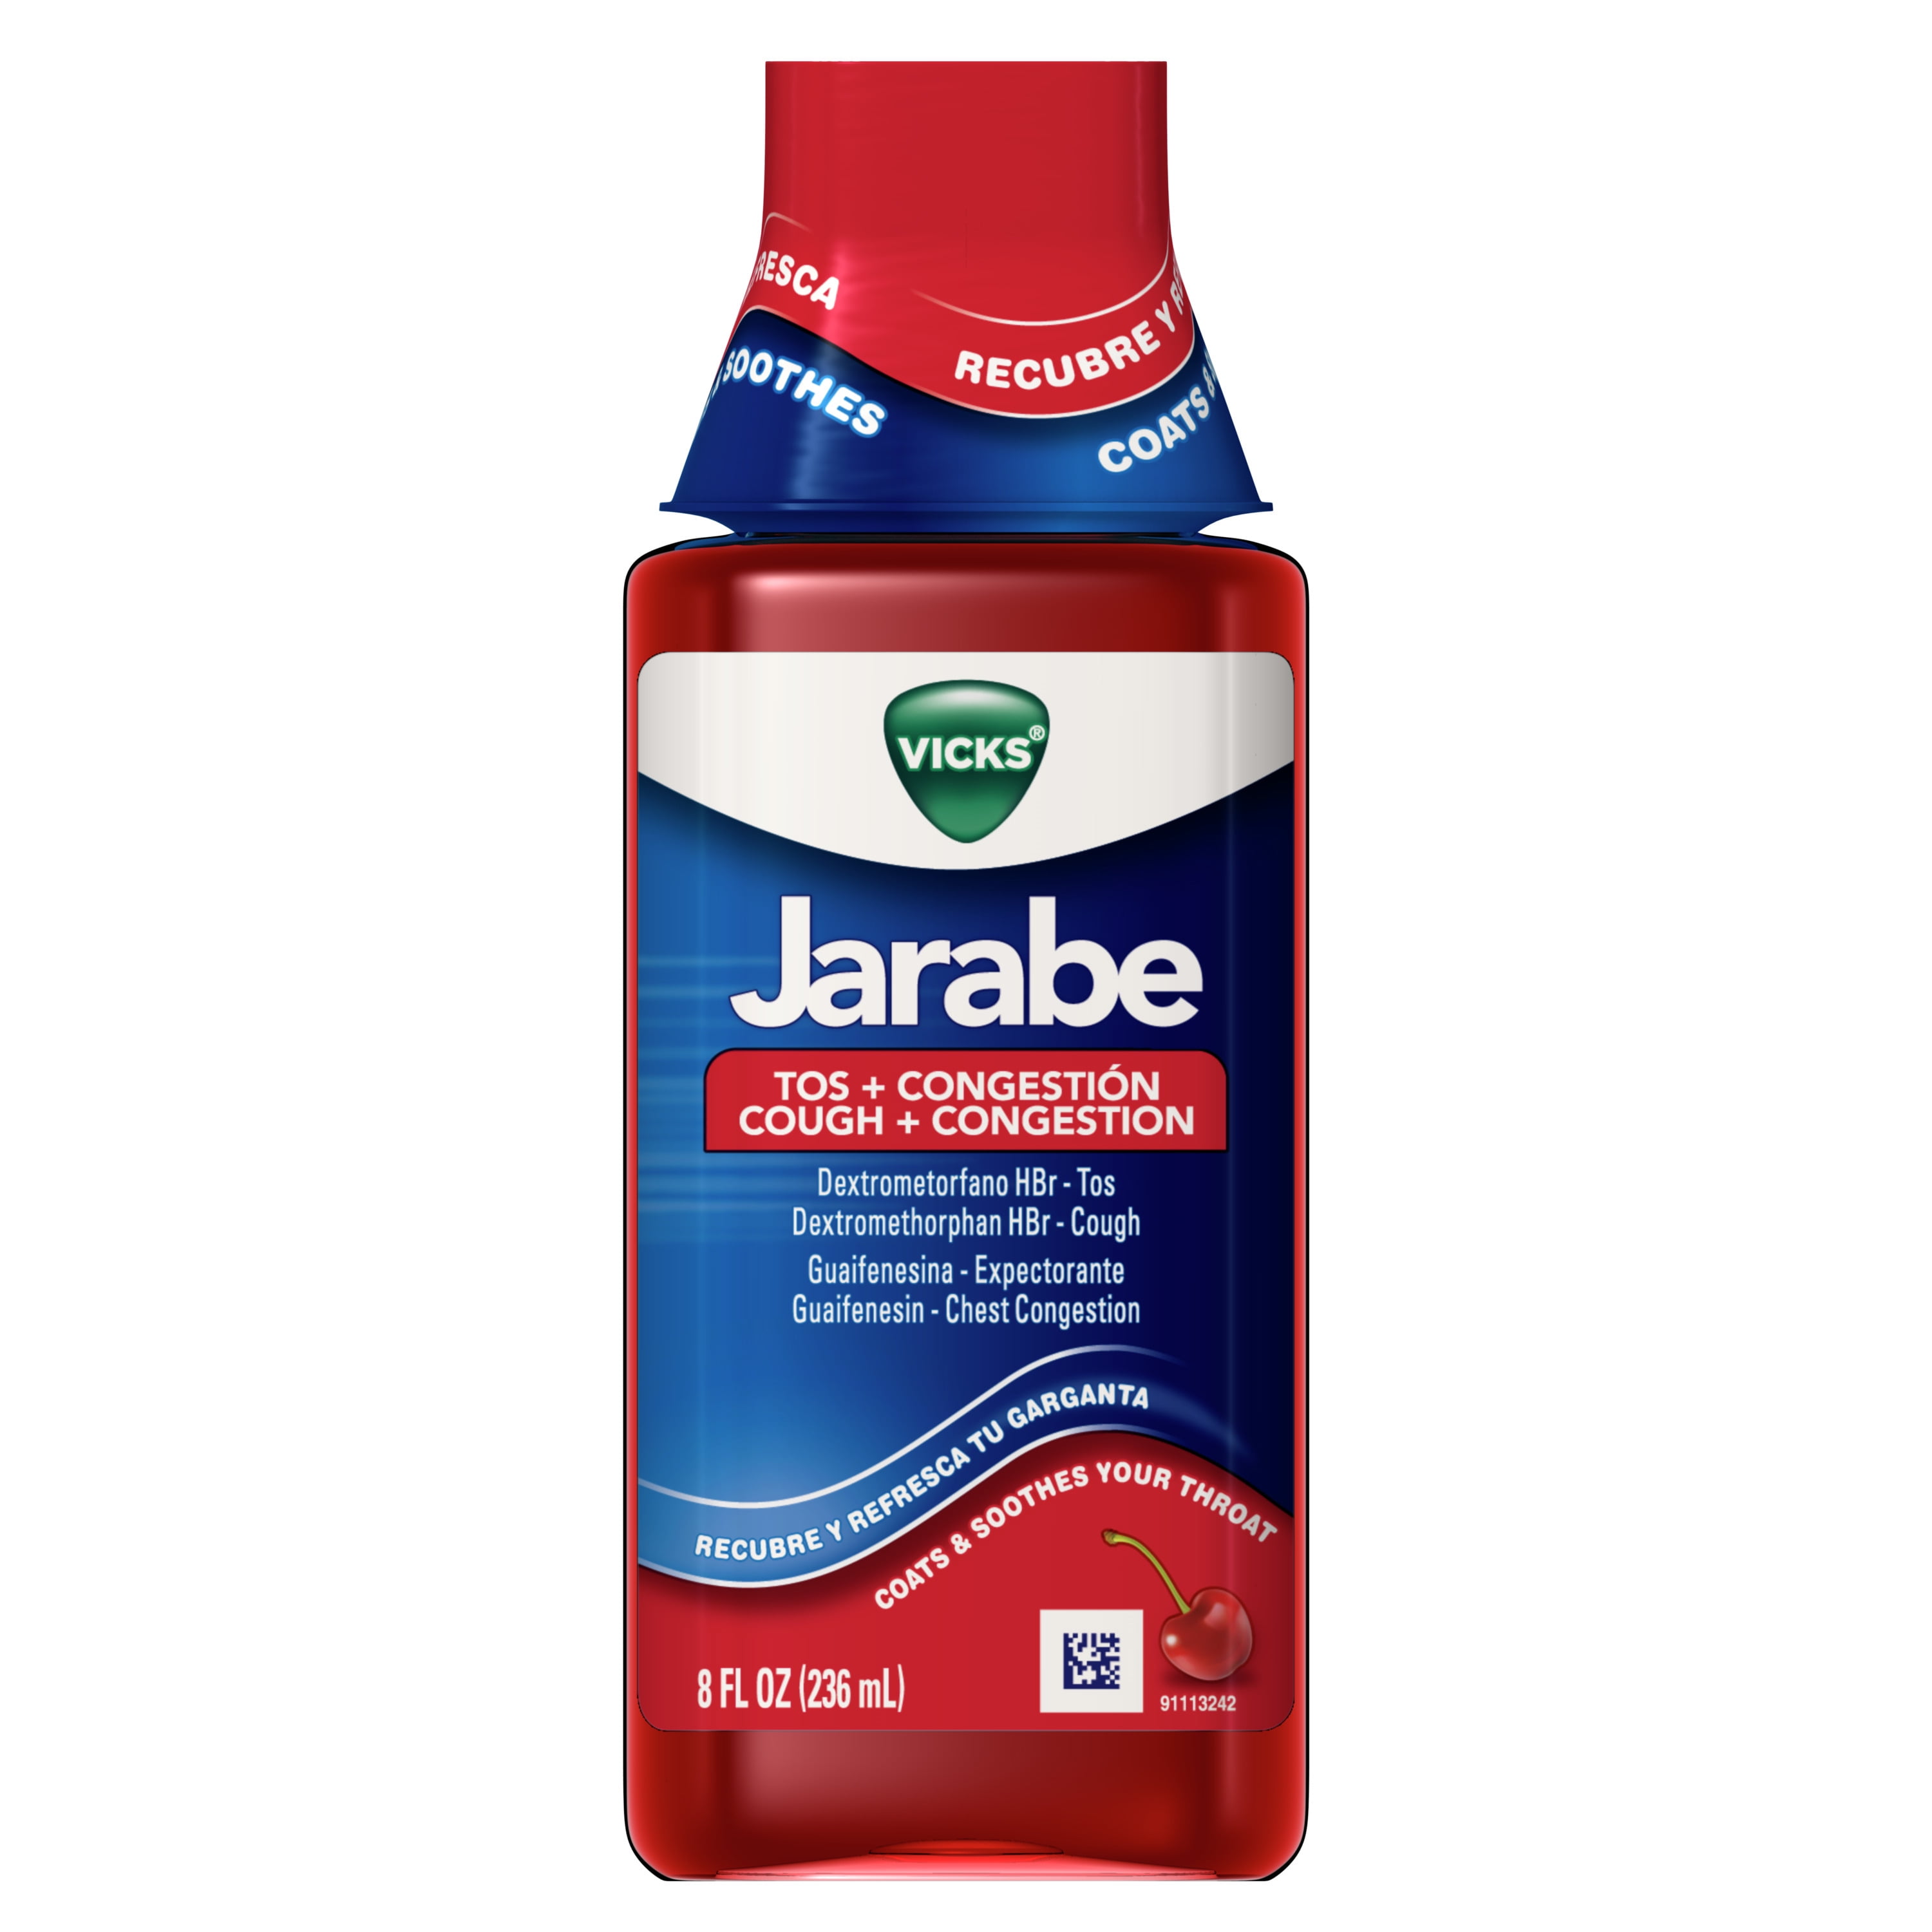 Vicks Jarabe Cough and Congestion Cold Liquid over-the-Counter Medicine,  Cherry Flavor, 8 fl oz 